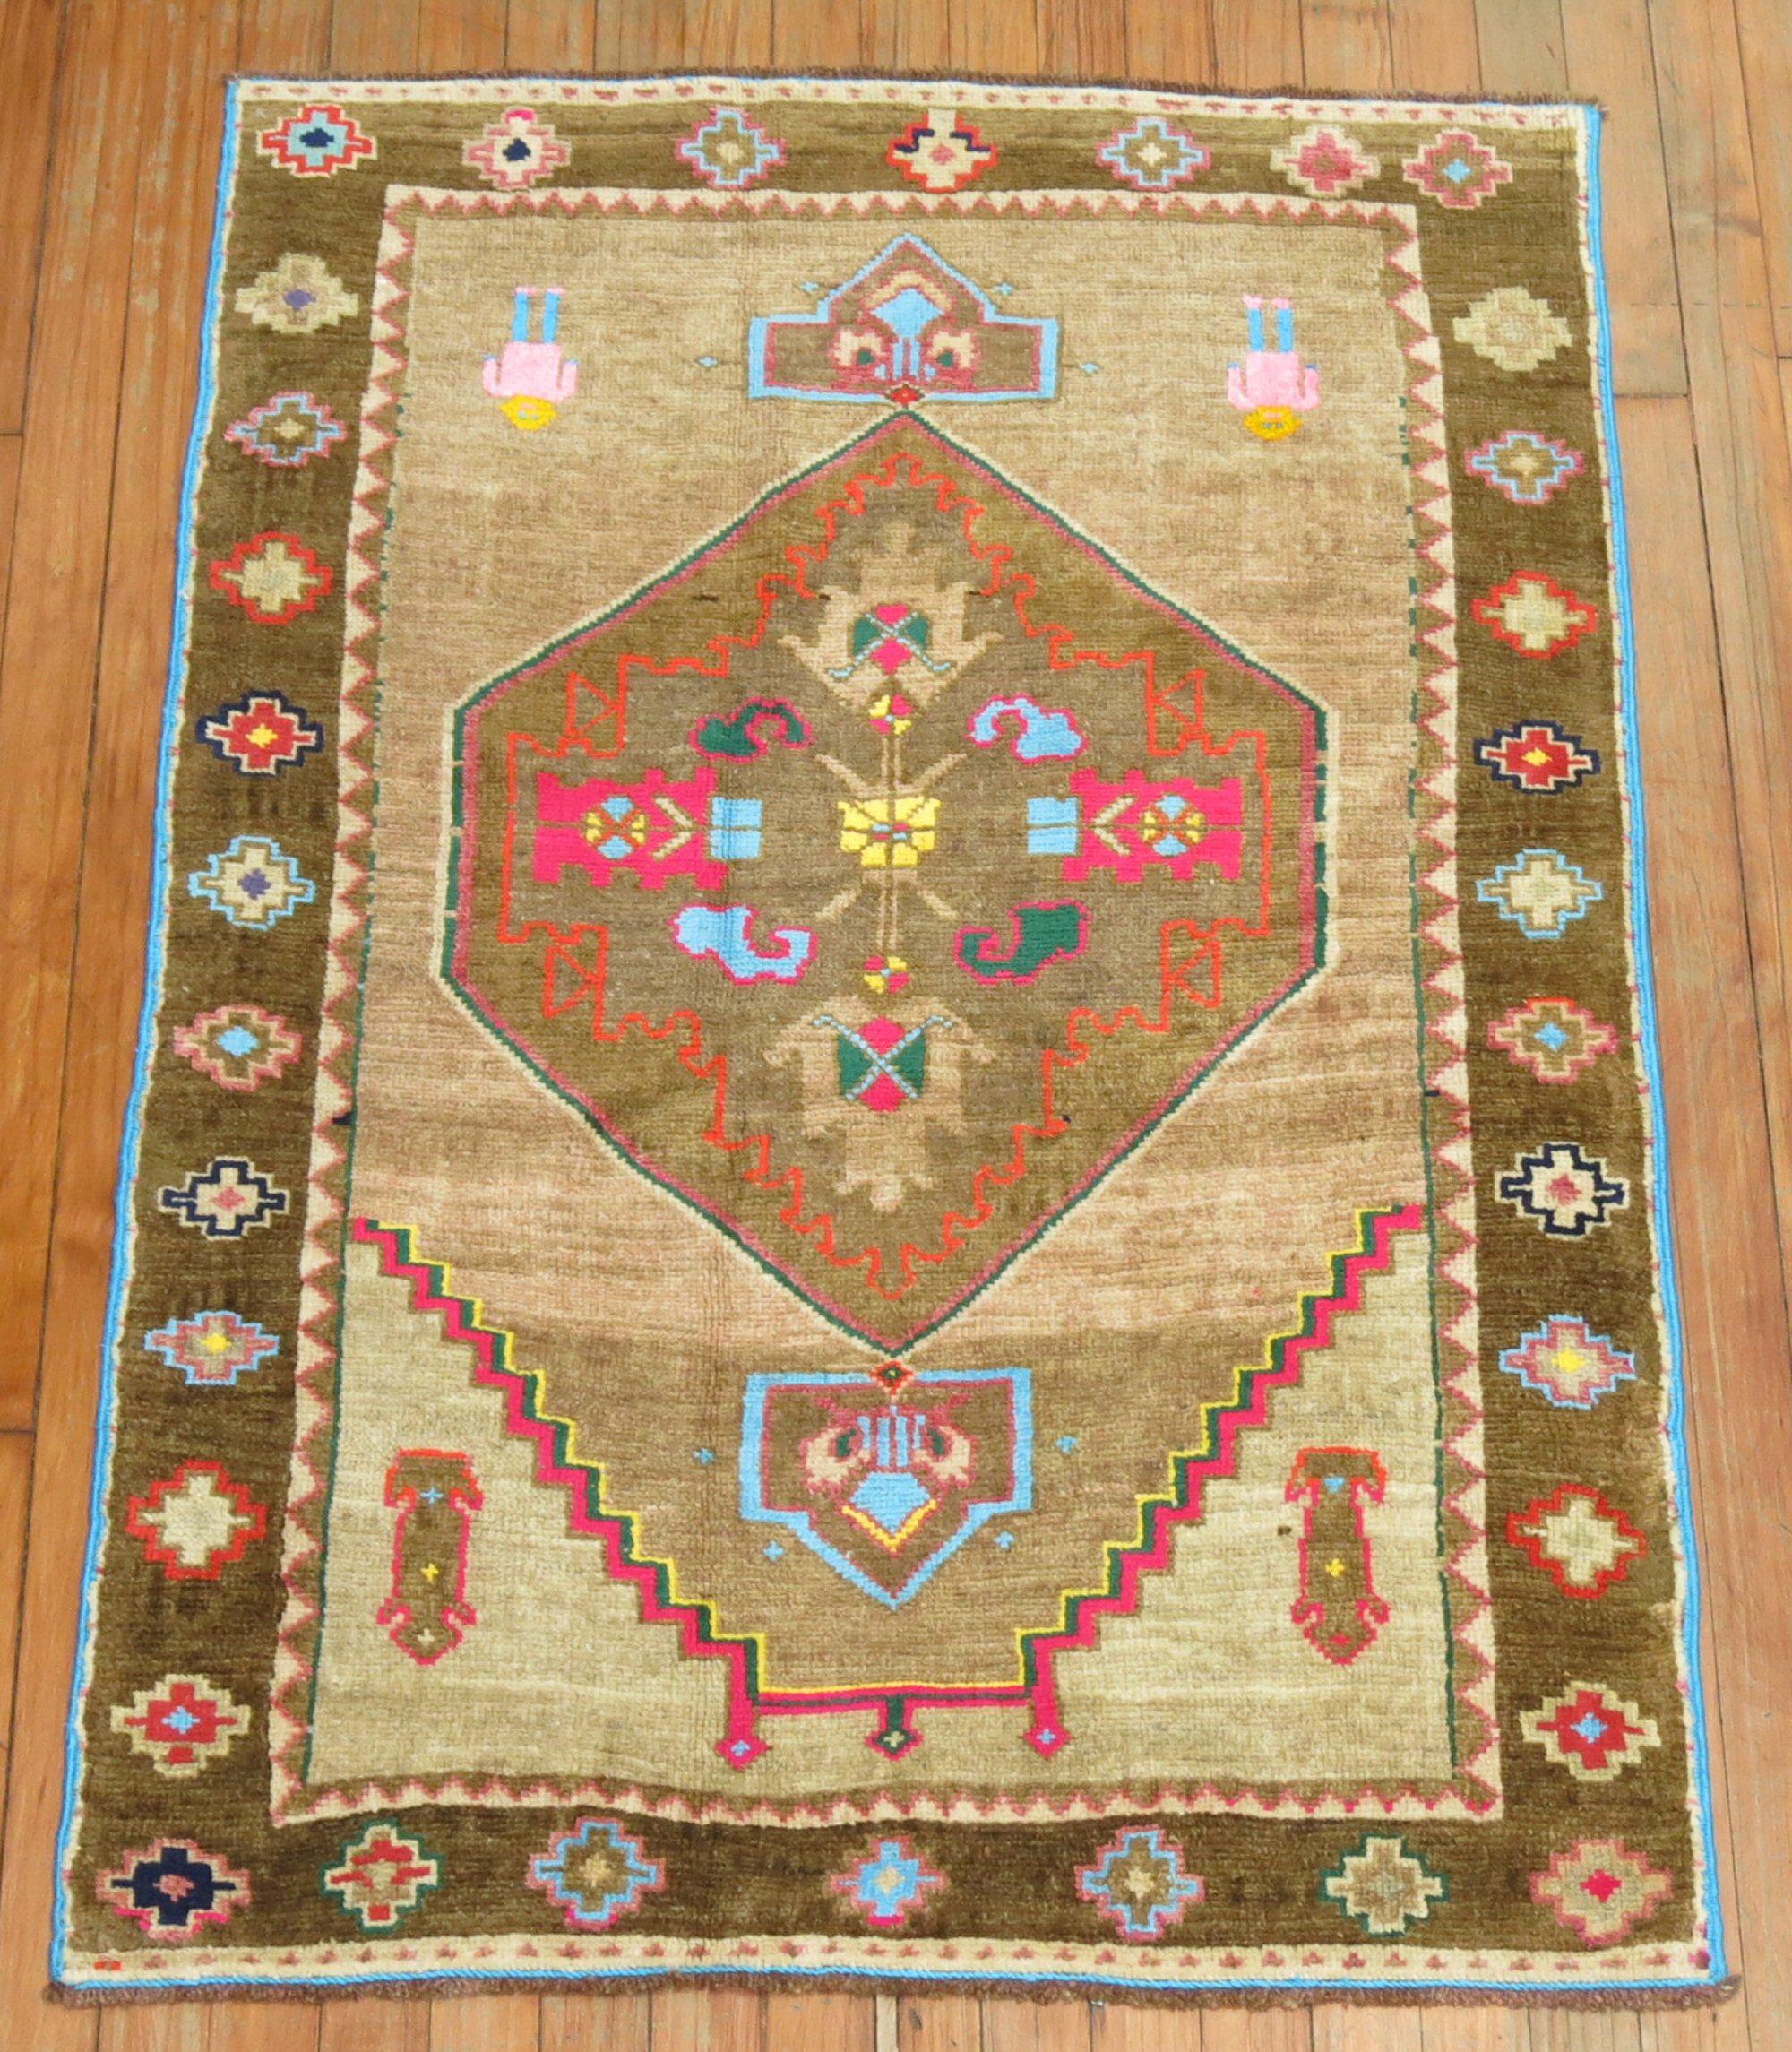 A mid-20th century Turkish Kars rug with cotton accents in bright intense colors. 2 humans dressed in pink and bright blue on 1 end. Blue side and cords added by the weaver too. A fun rug to own.

Measures: 2'10